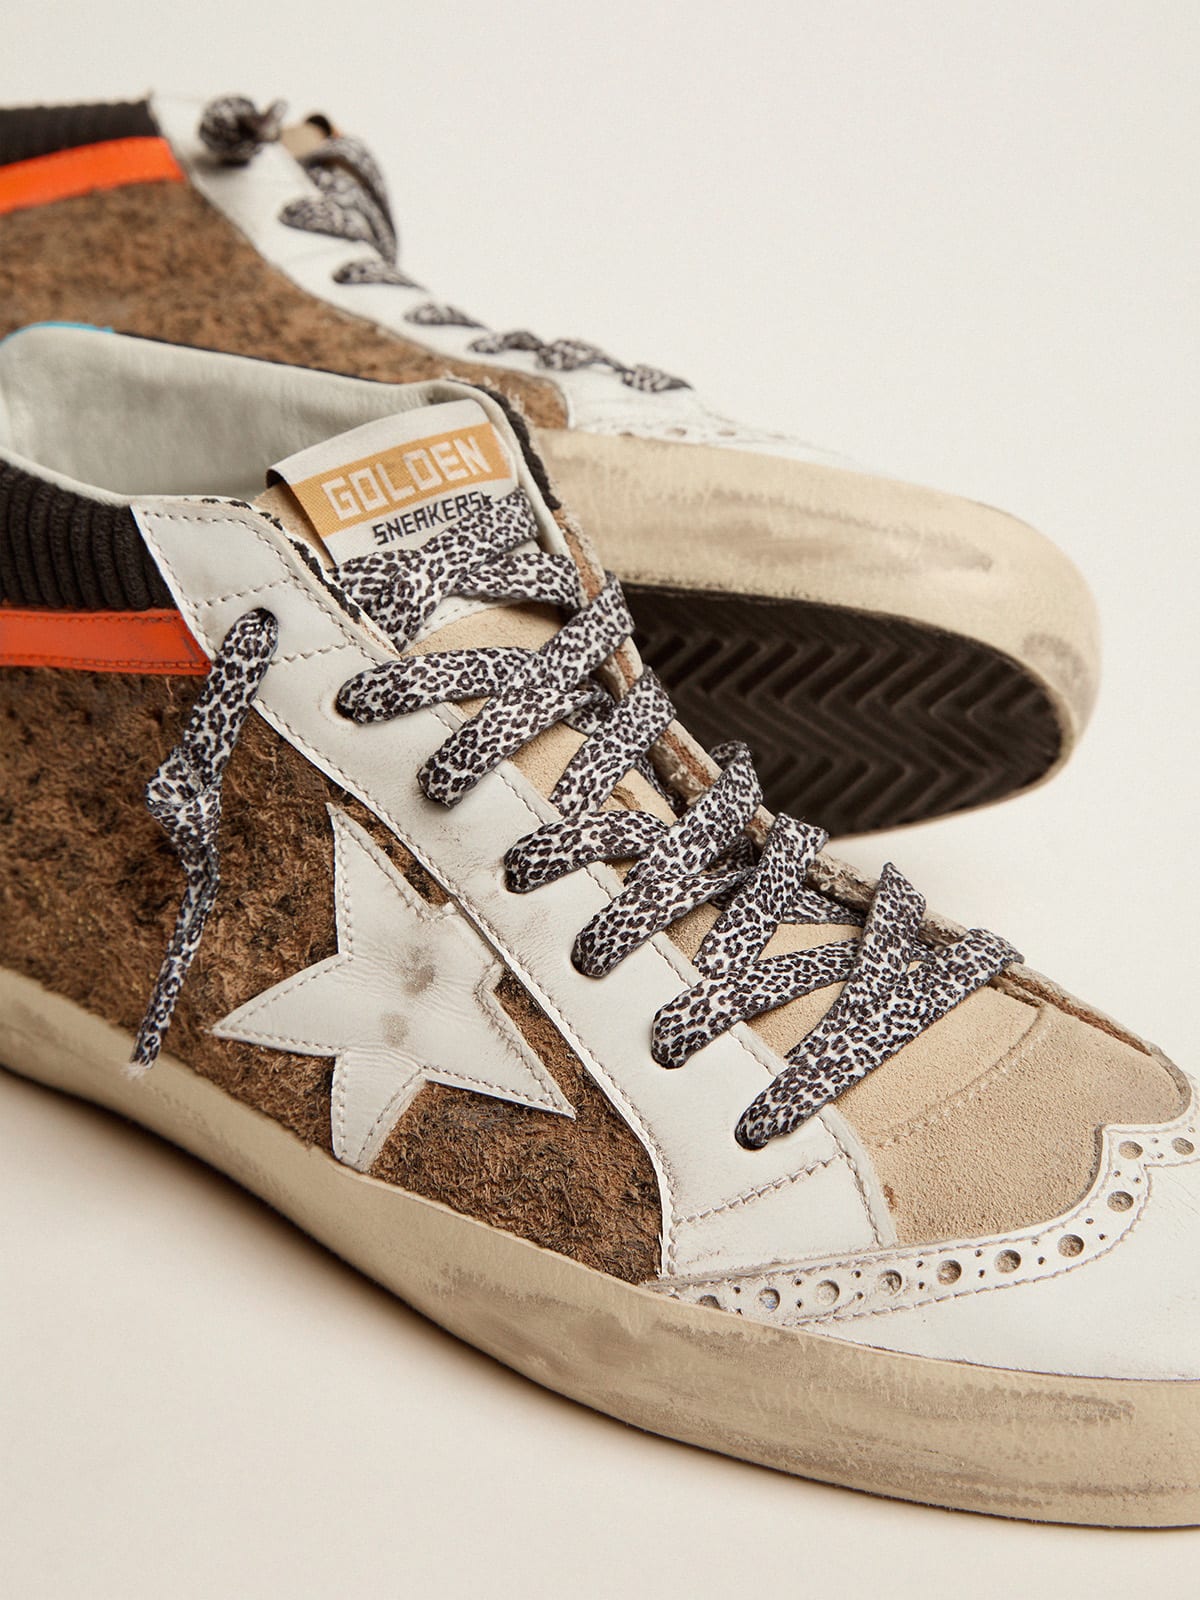 Golden Goose - Mid Star LTD sneakers with leopard-print and corduroy suede upper in 